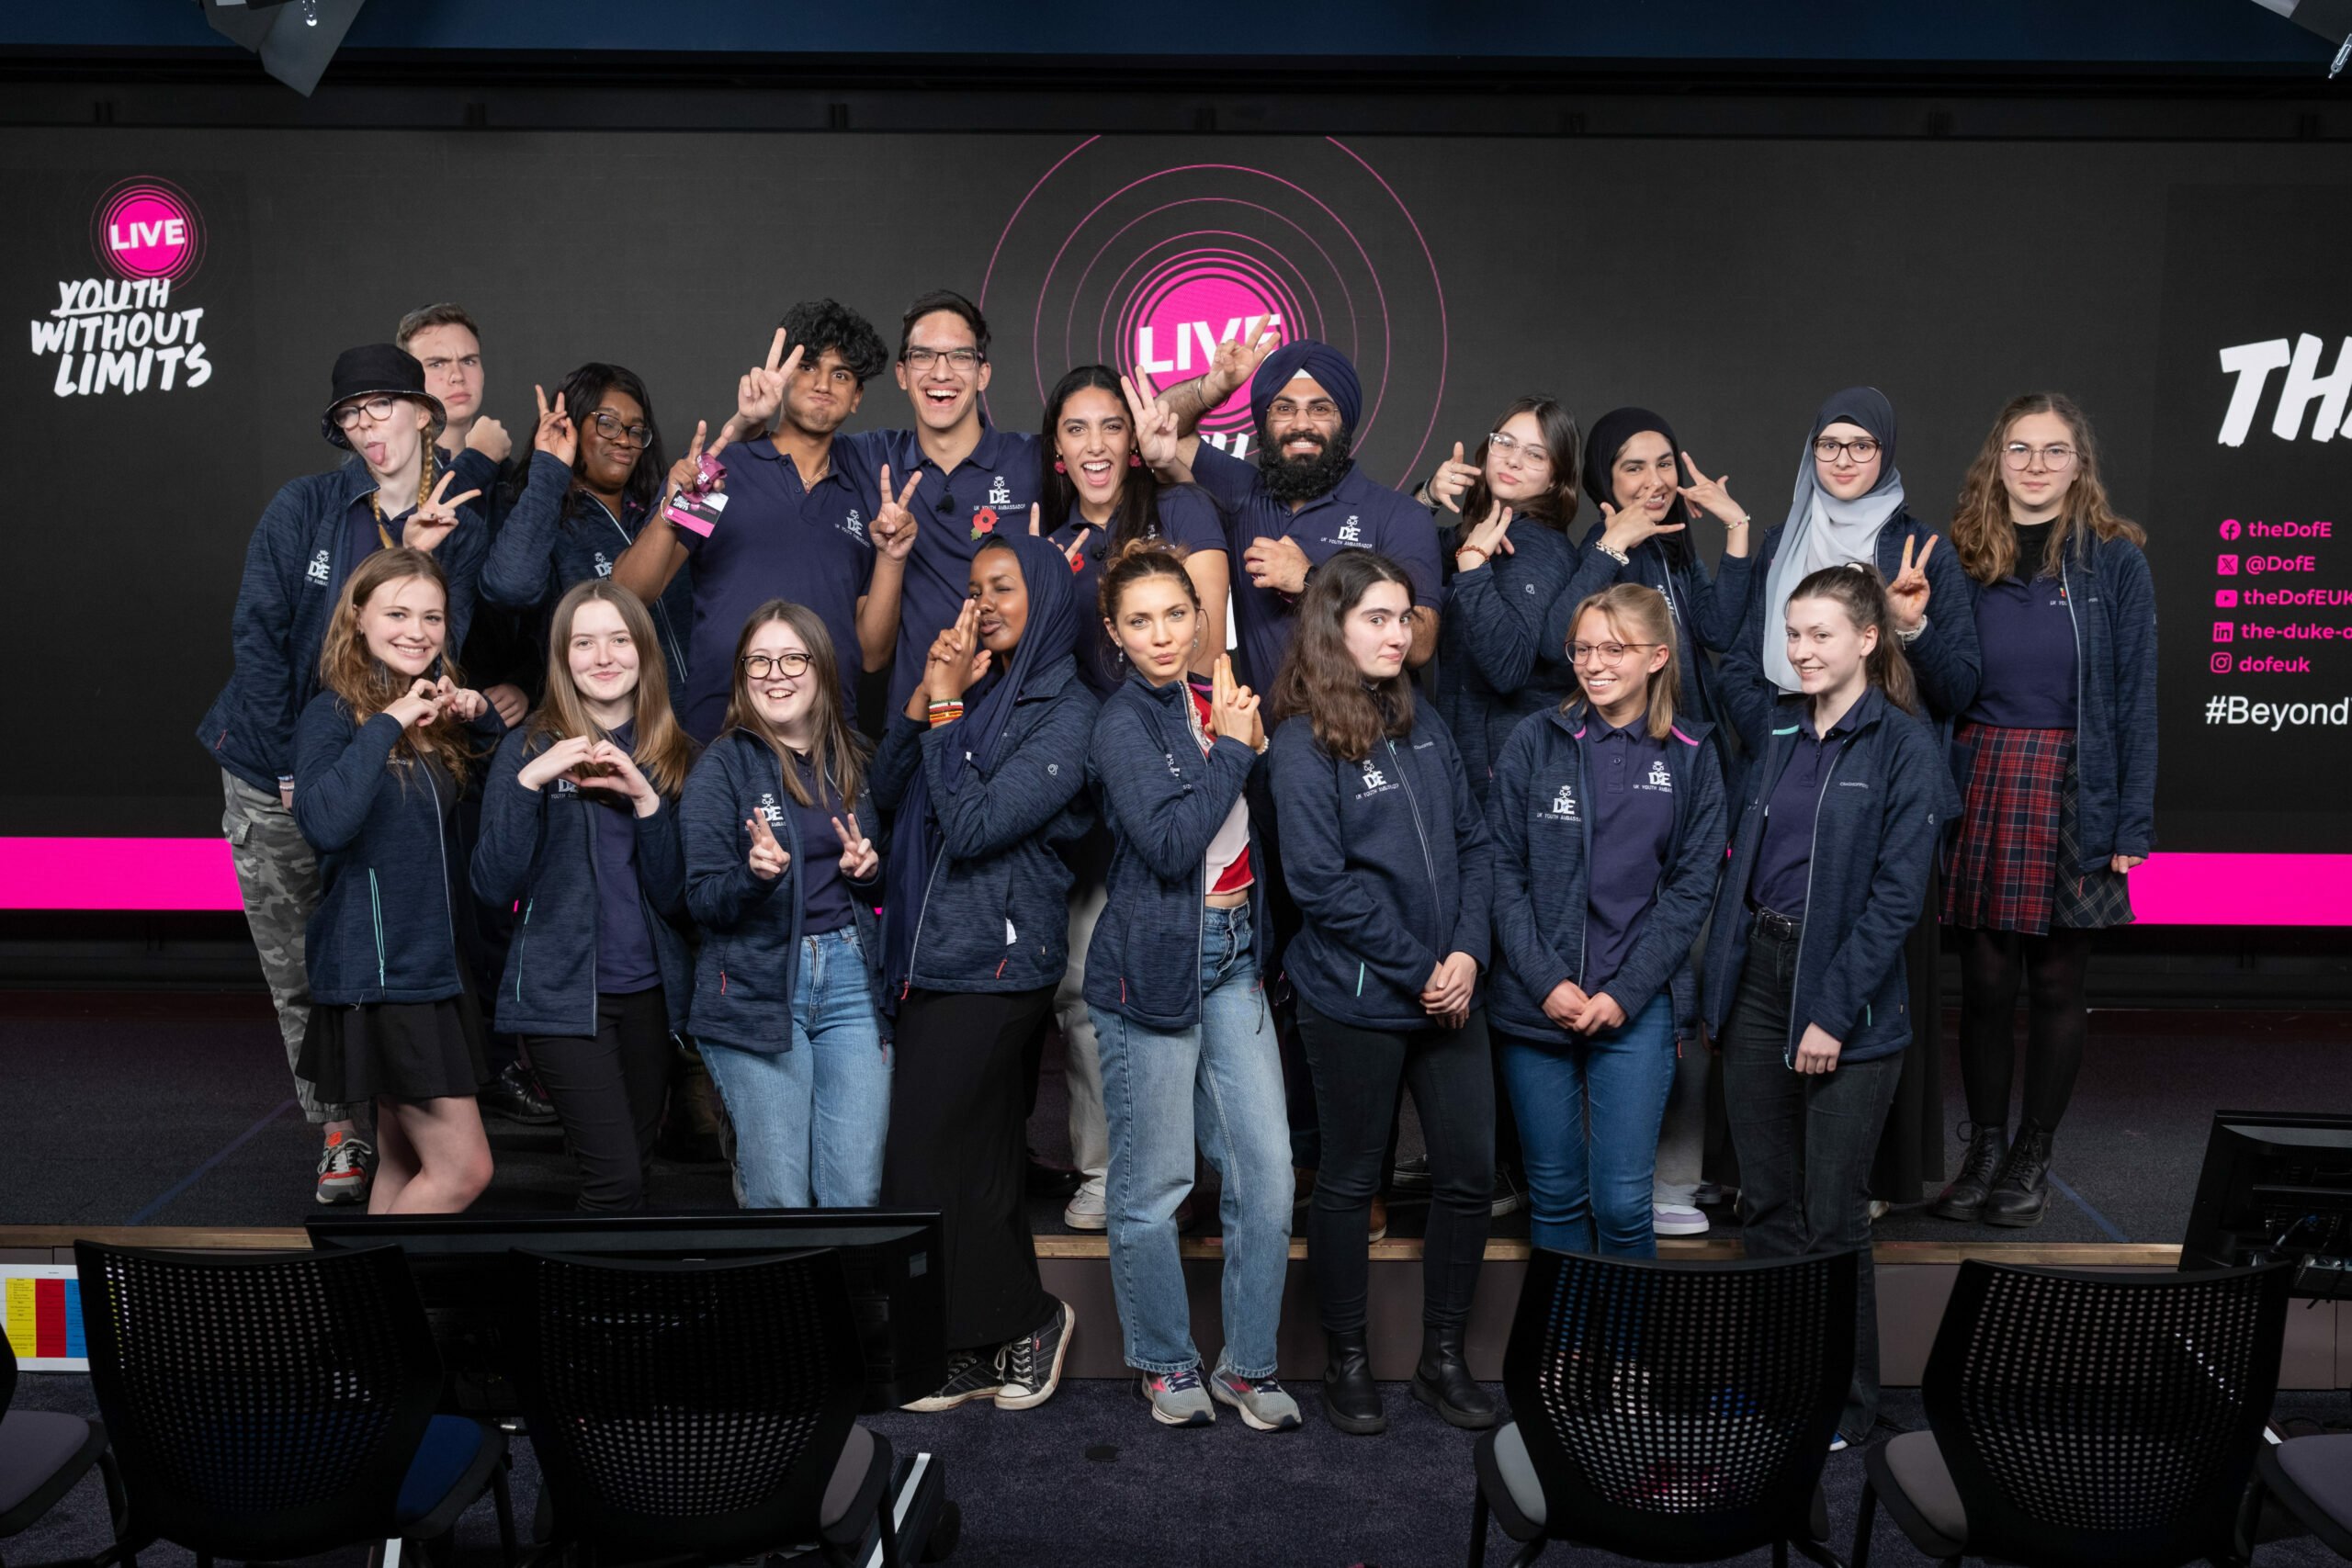 A group of 19 DofE UK Youth Ambassadors standing on stage at the DofE's Youth Without Limits LIVE event. They are all wearing matching navy fleeces, doing different poses and looking directly to the camera.